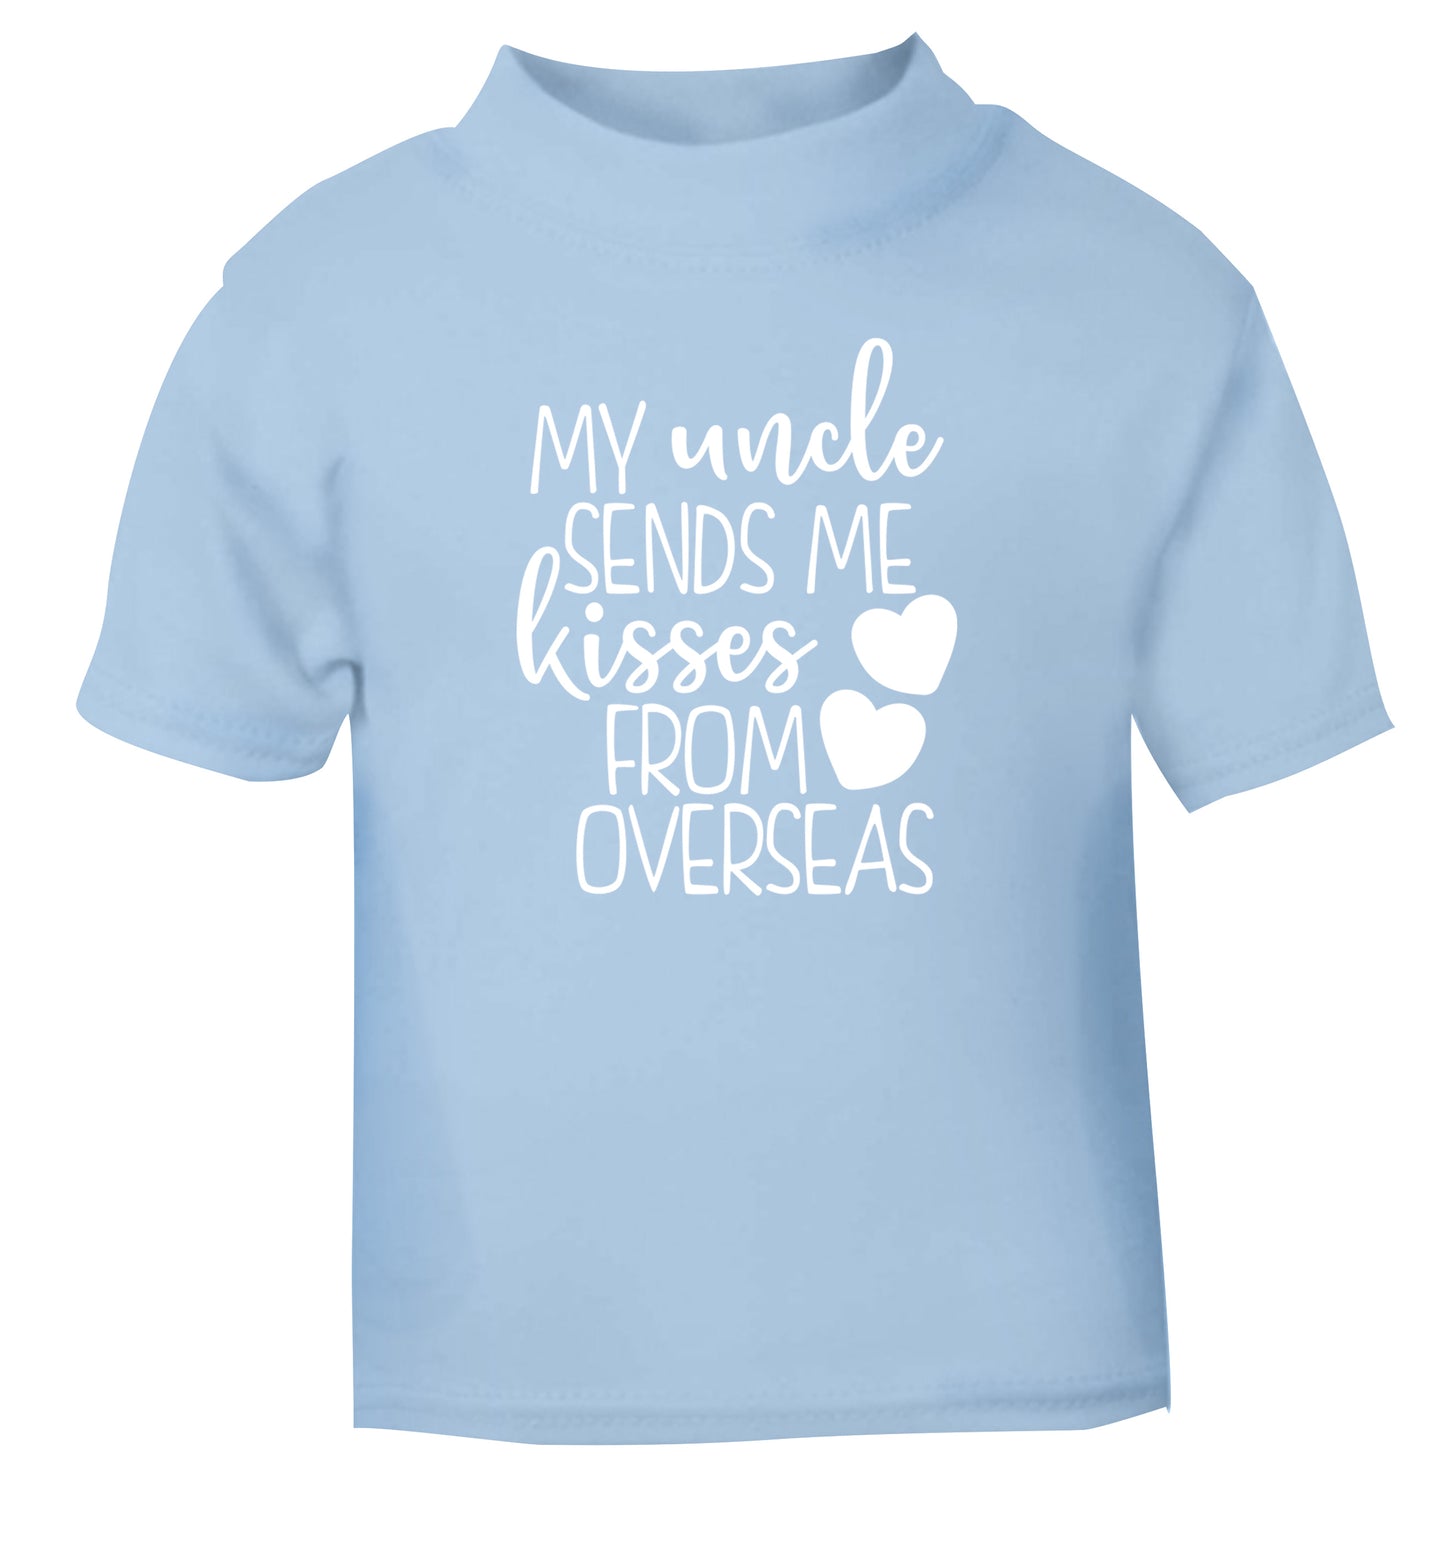 My uncle sends me kisses from overseas light blue Baby Toddler Tshirt 2 Years